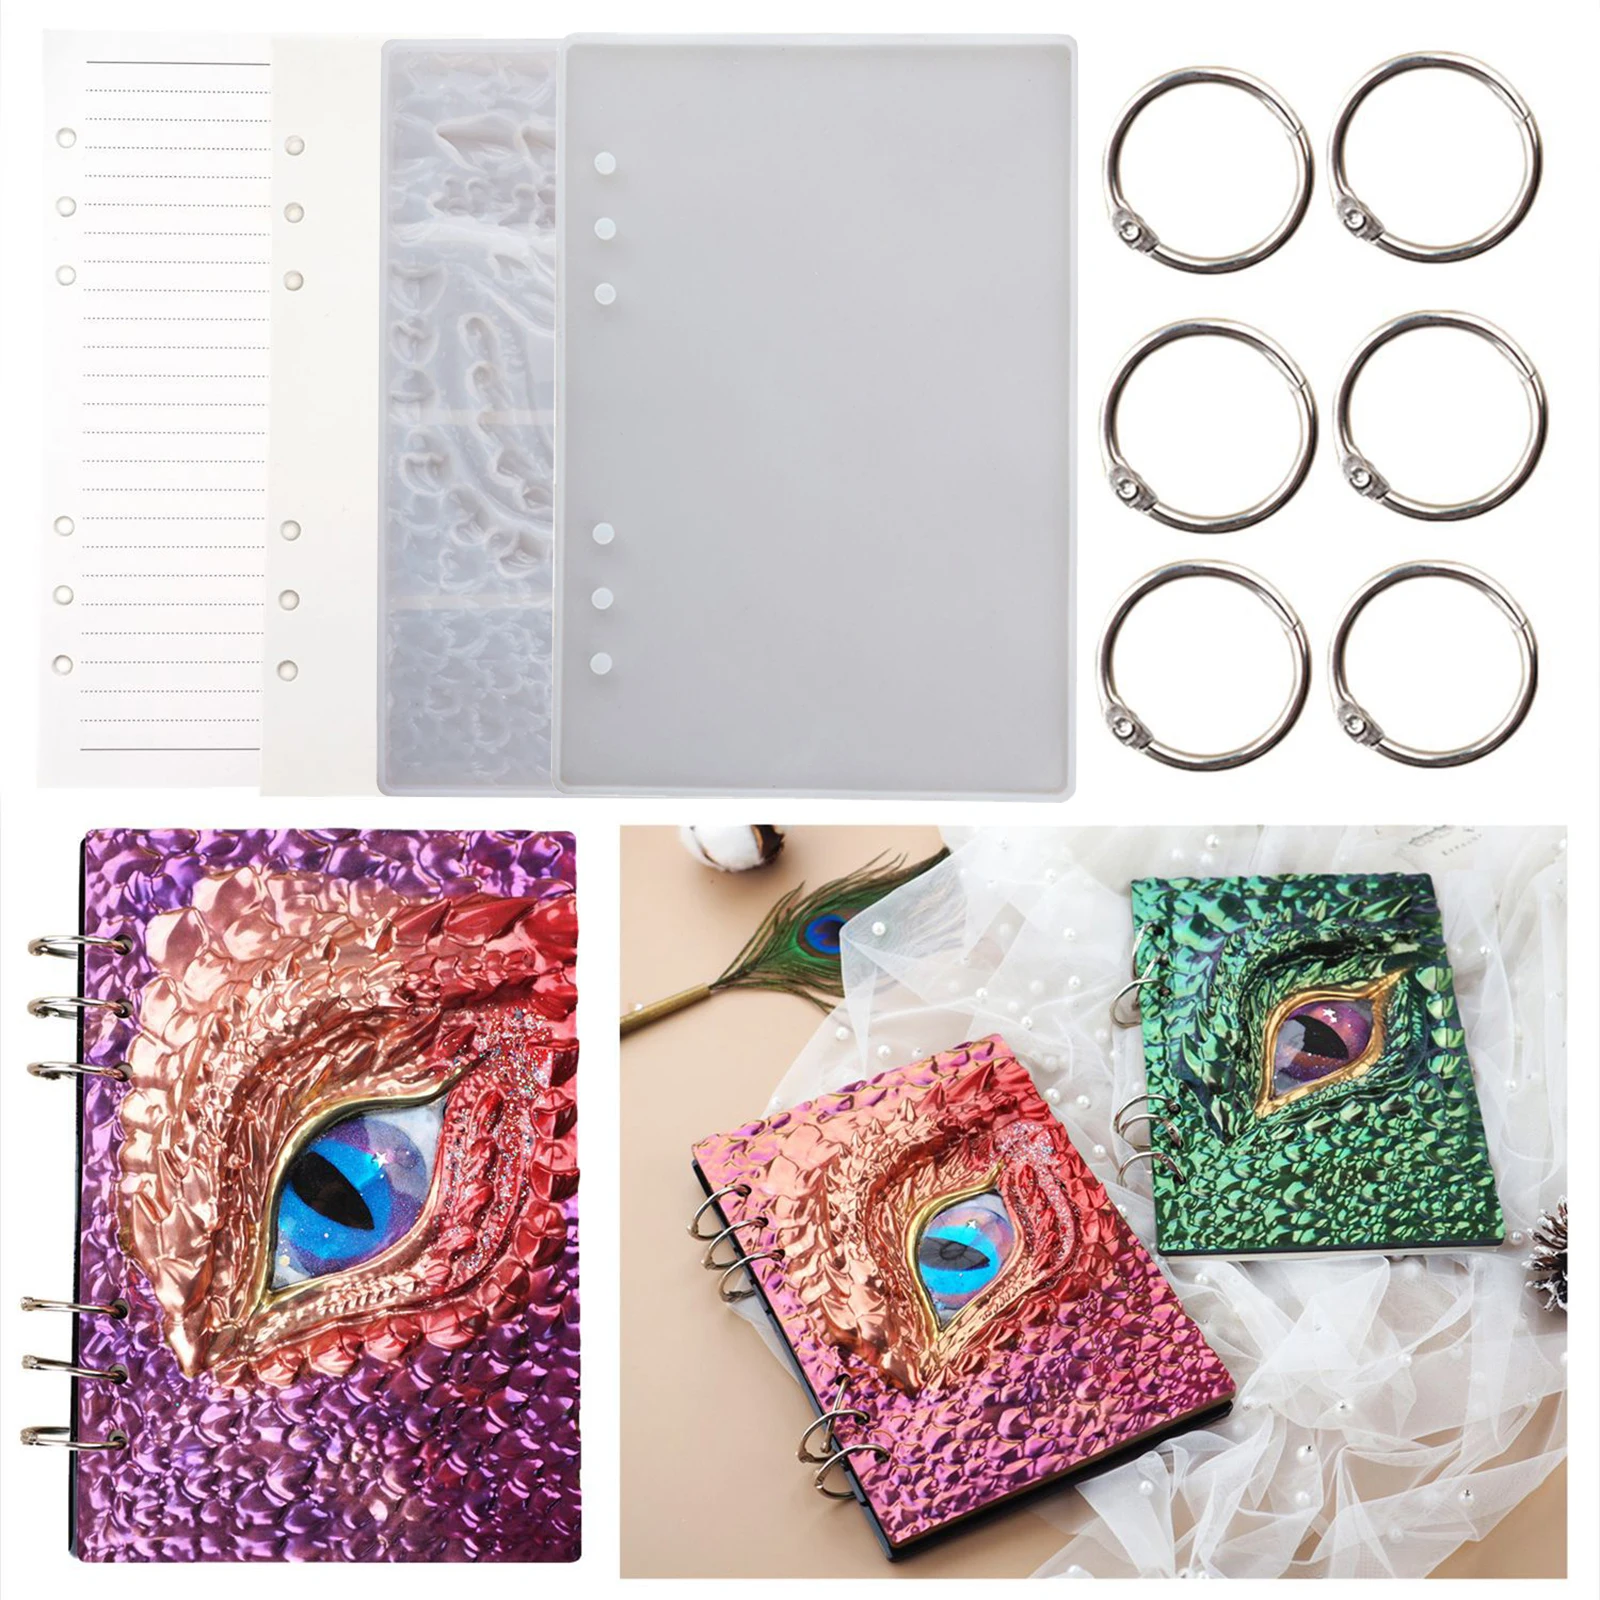 Note Book Cover Resin Molds Unique Dragon Eye Silicone Molds for Note Book Cover Epoxy Resin